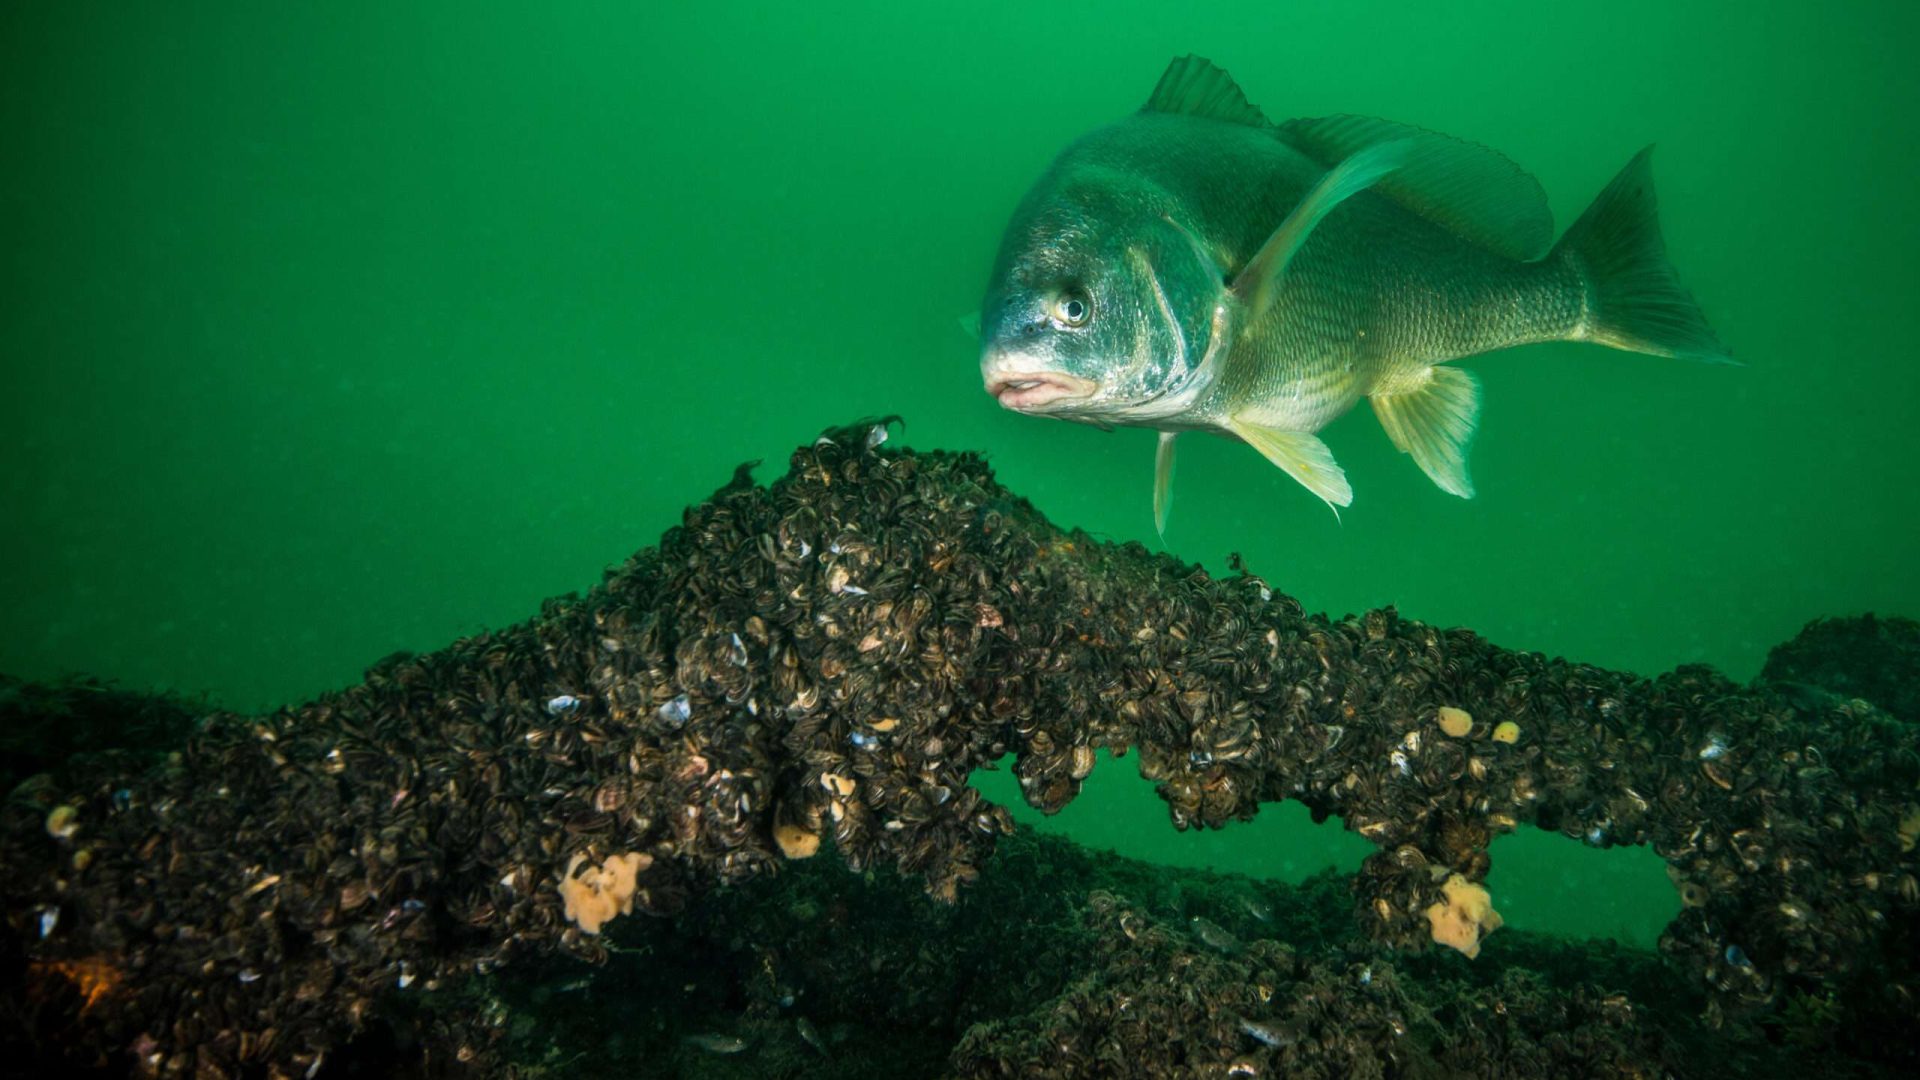 Fish swimming near underwater structure with mussels